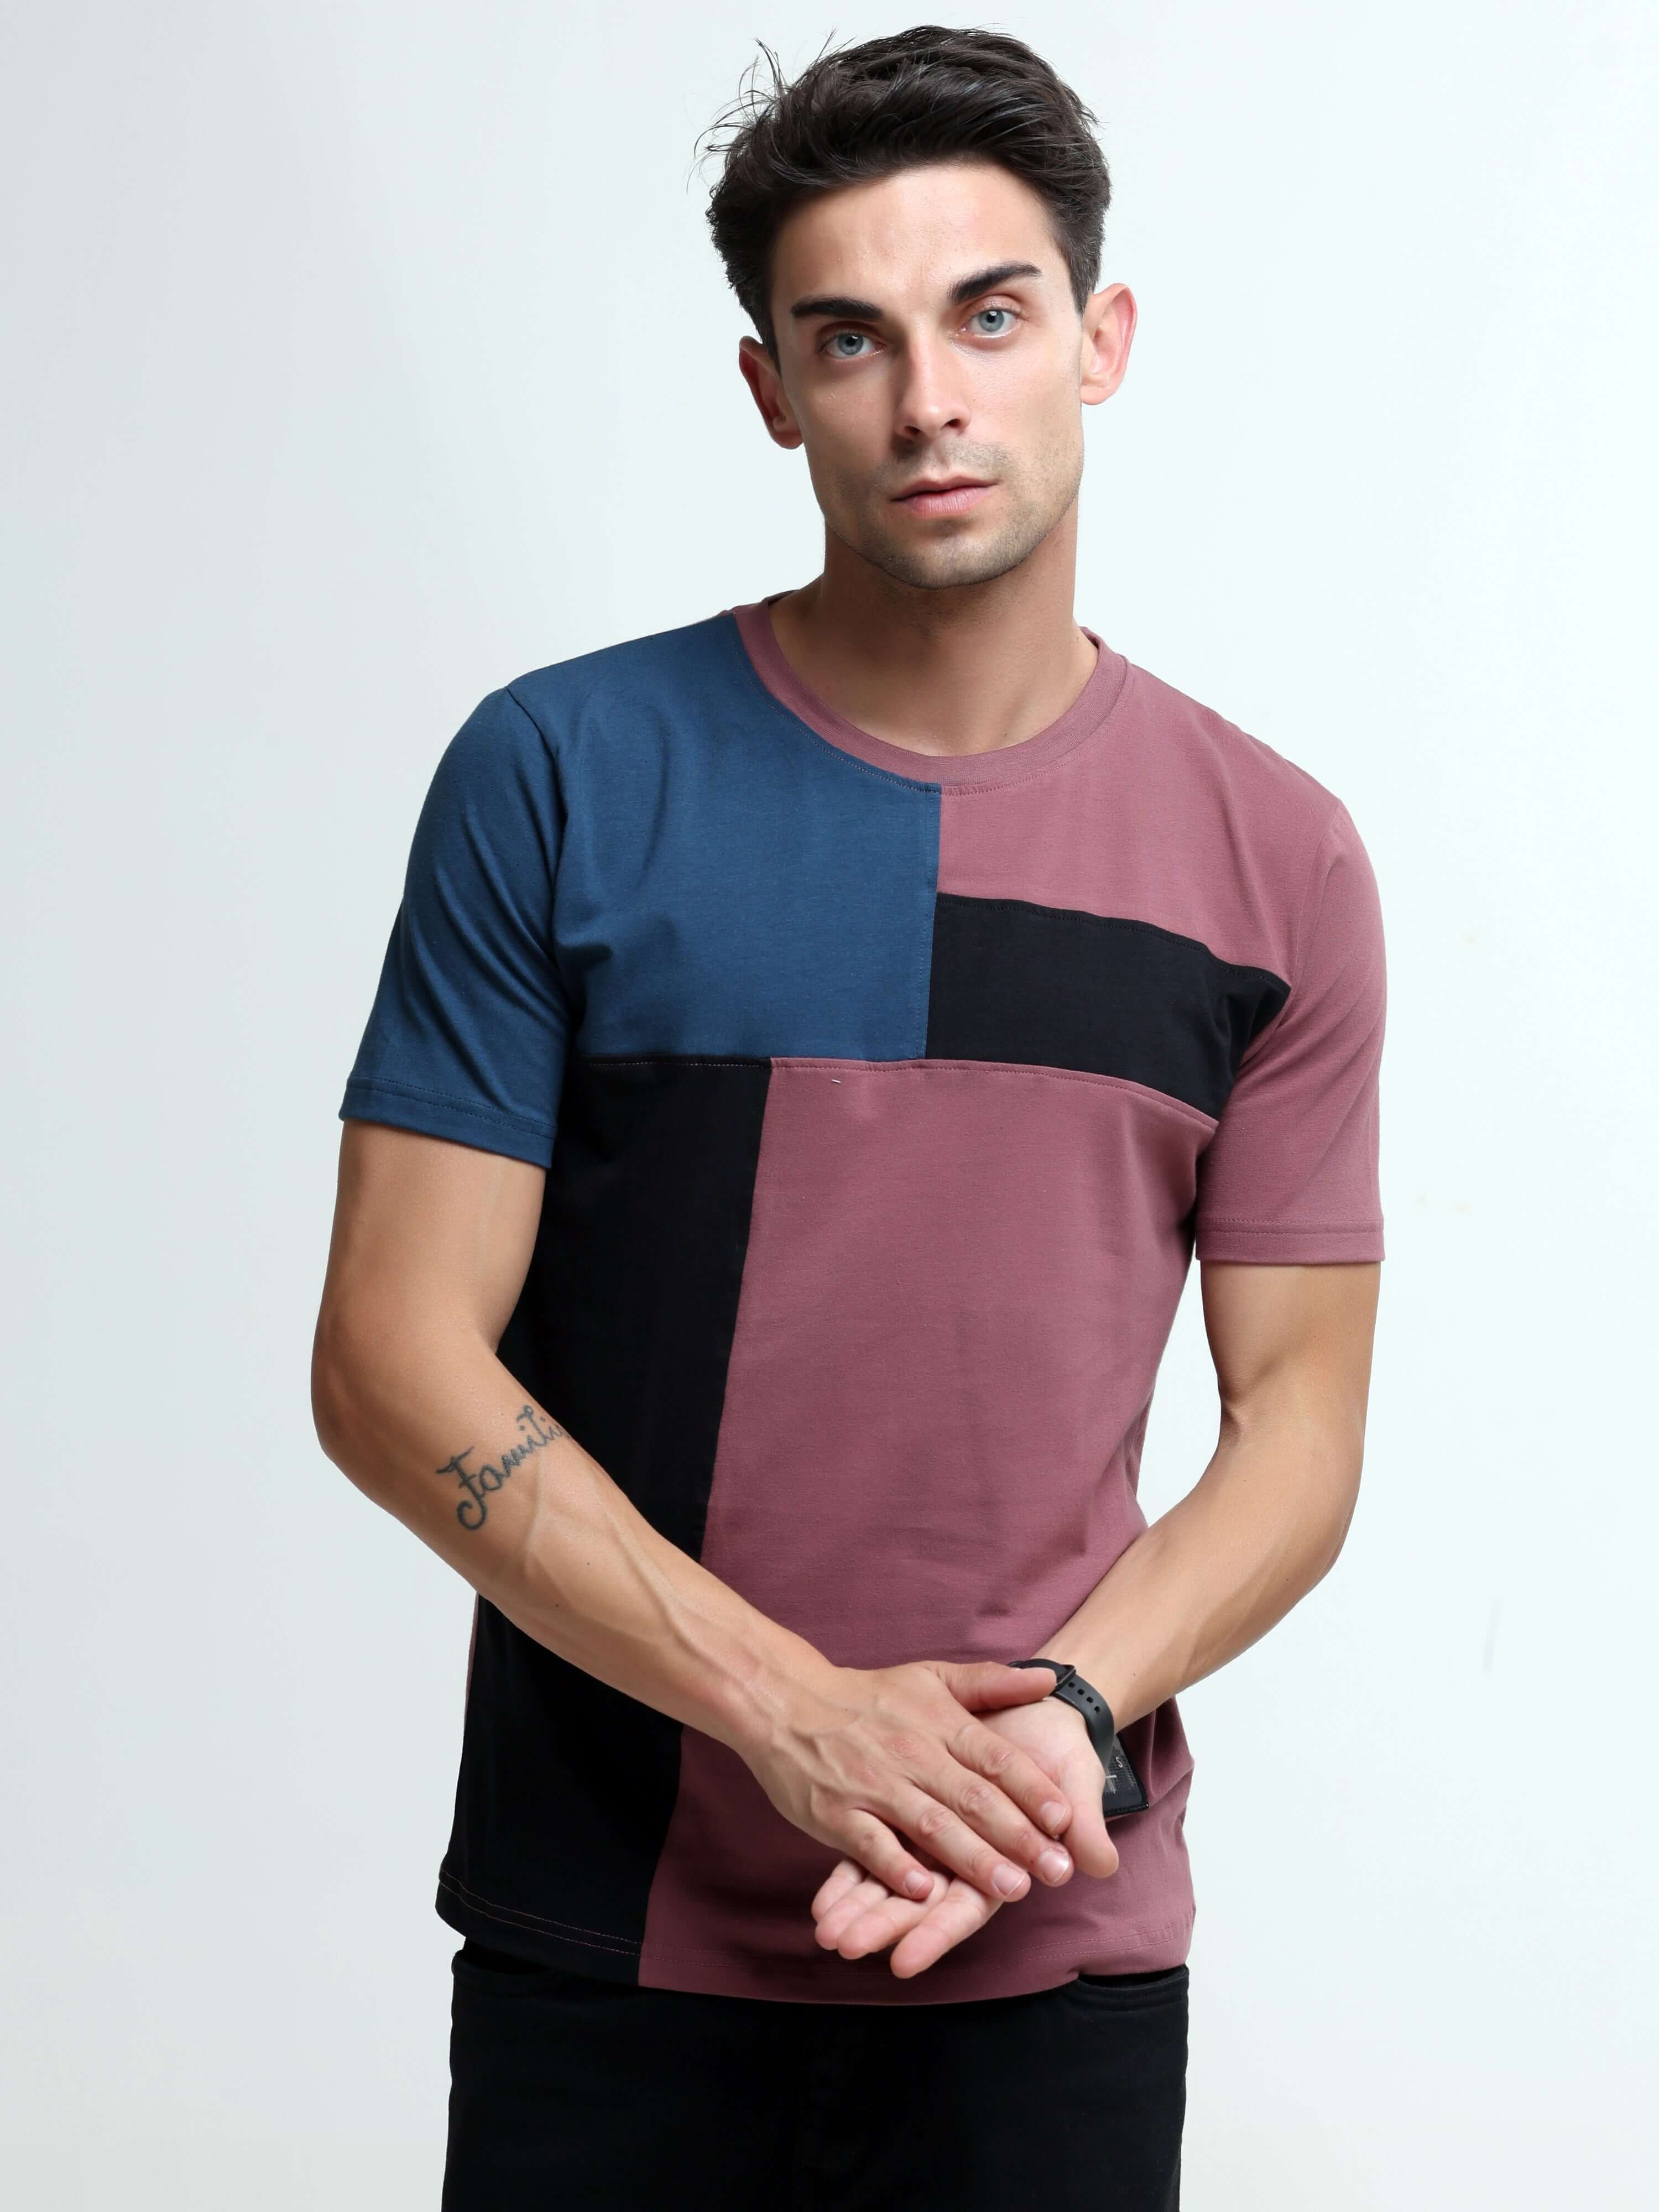 Blitz clay pink light weight tshirt shop online at Estilocus. This relax-fit Cut and Sew T-shirt is comfortable and the perfect essential all year round. Pair it with white jeans and sneakers and layer it up with a denim jacket for a casual and put-togeth